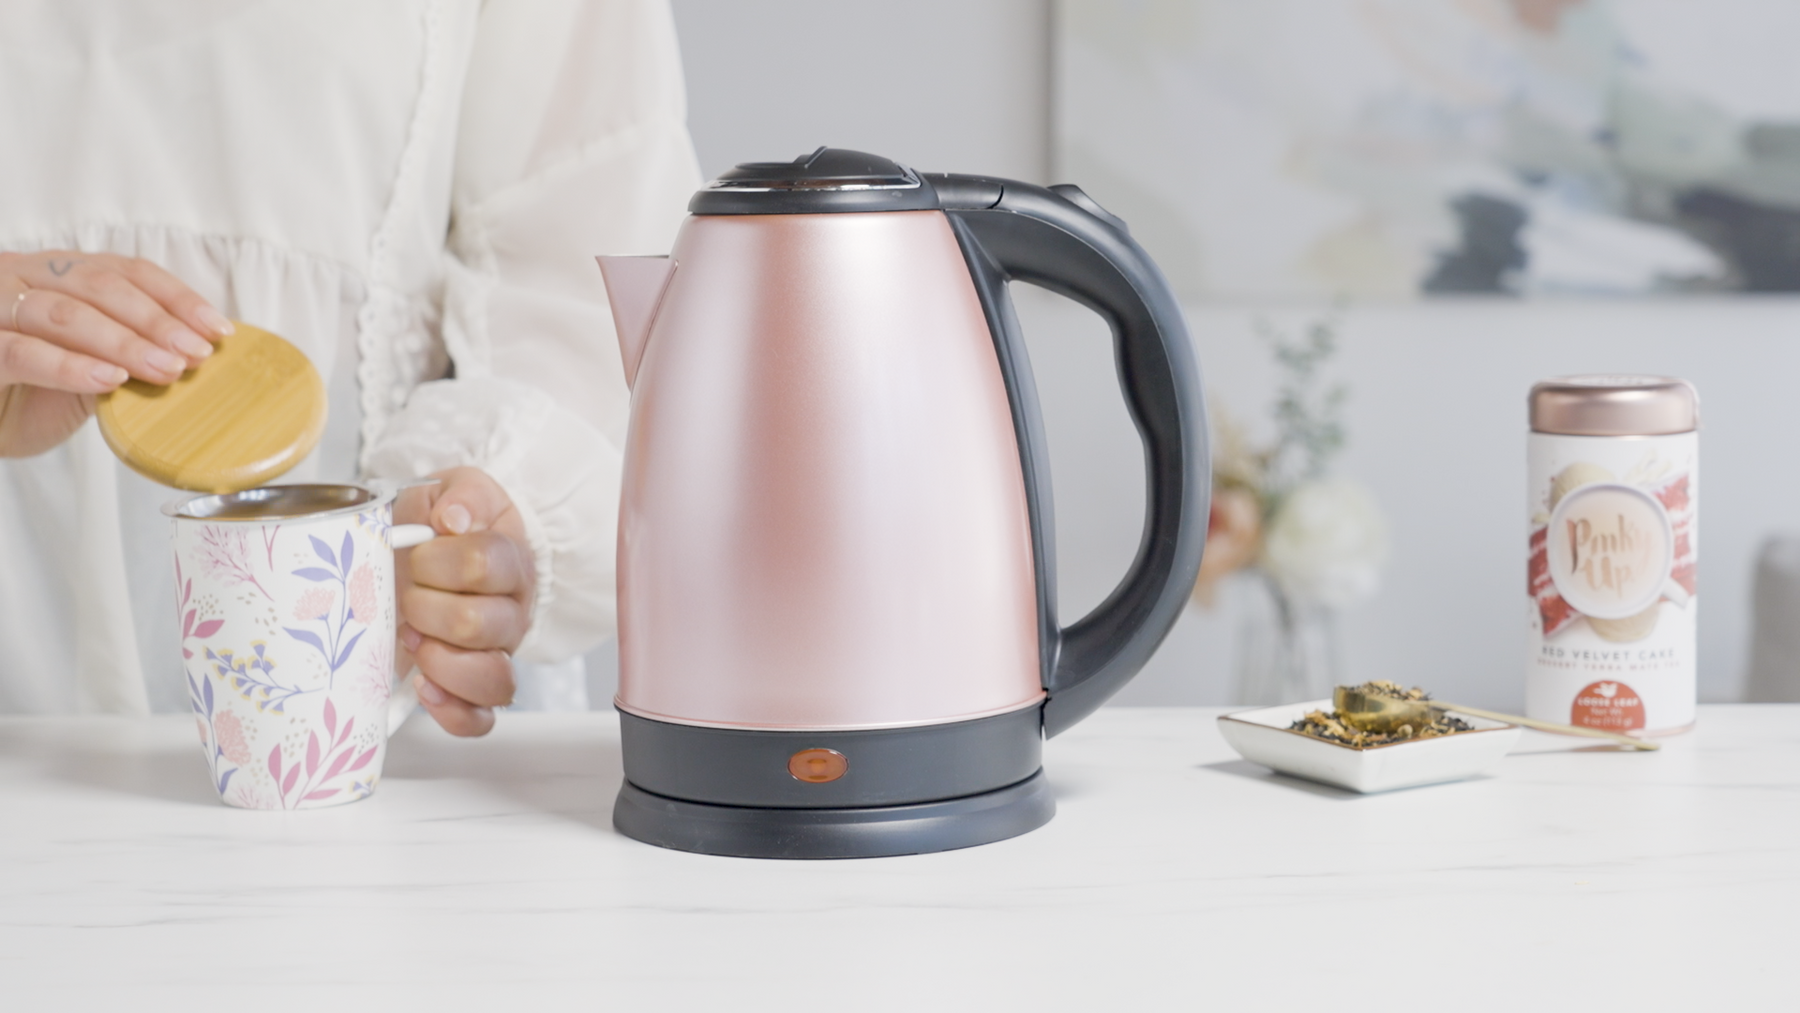 Pinky Up Parker Electric Tea Kettle, Hot Water Dispenser, Automatic Shut  Off, Stainless Steel Cordless Electric Teapot, 56oz, Rose Gold – Pinky Up  Tea